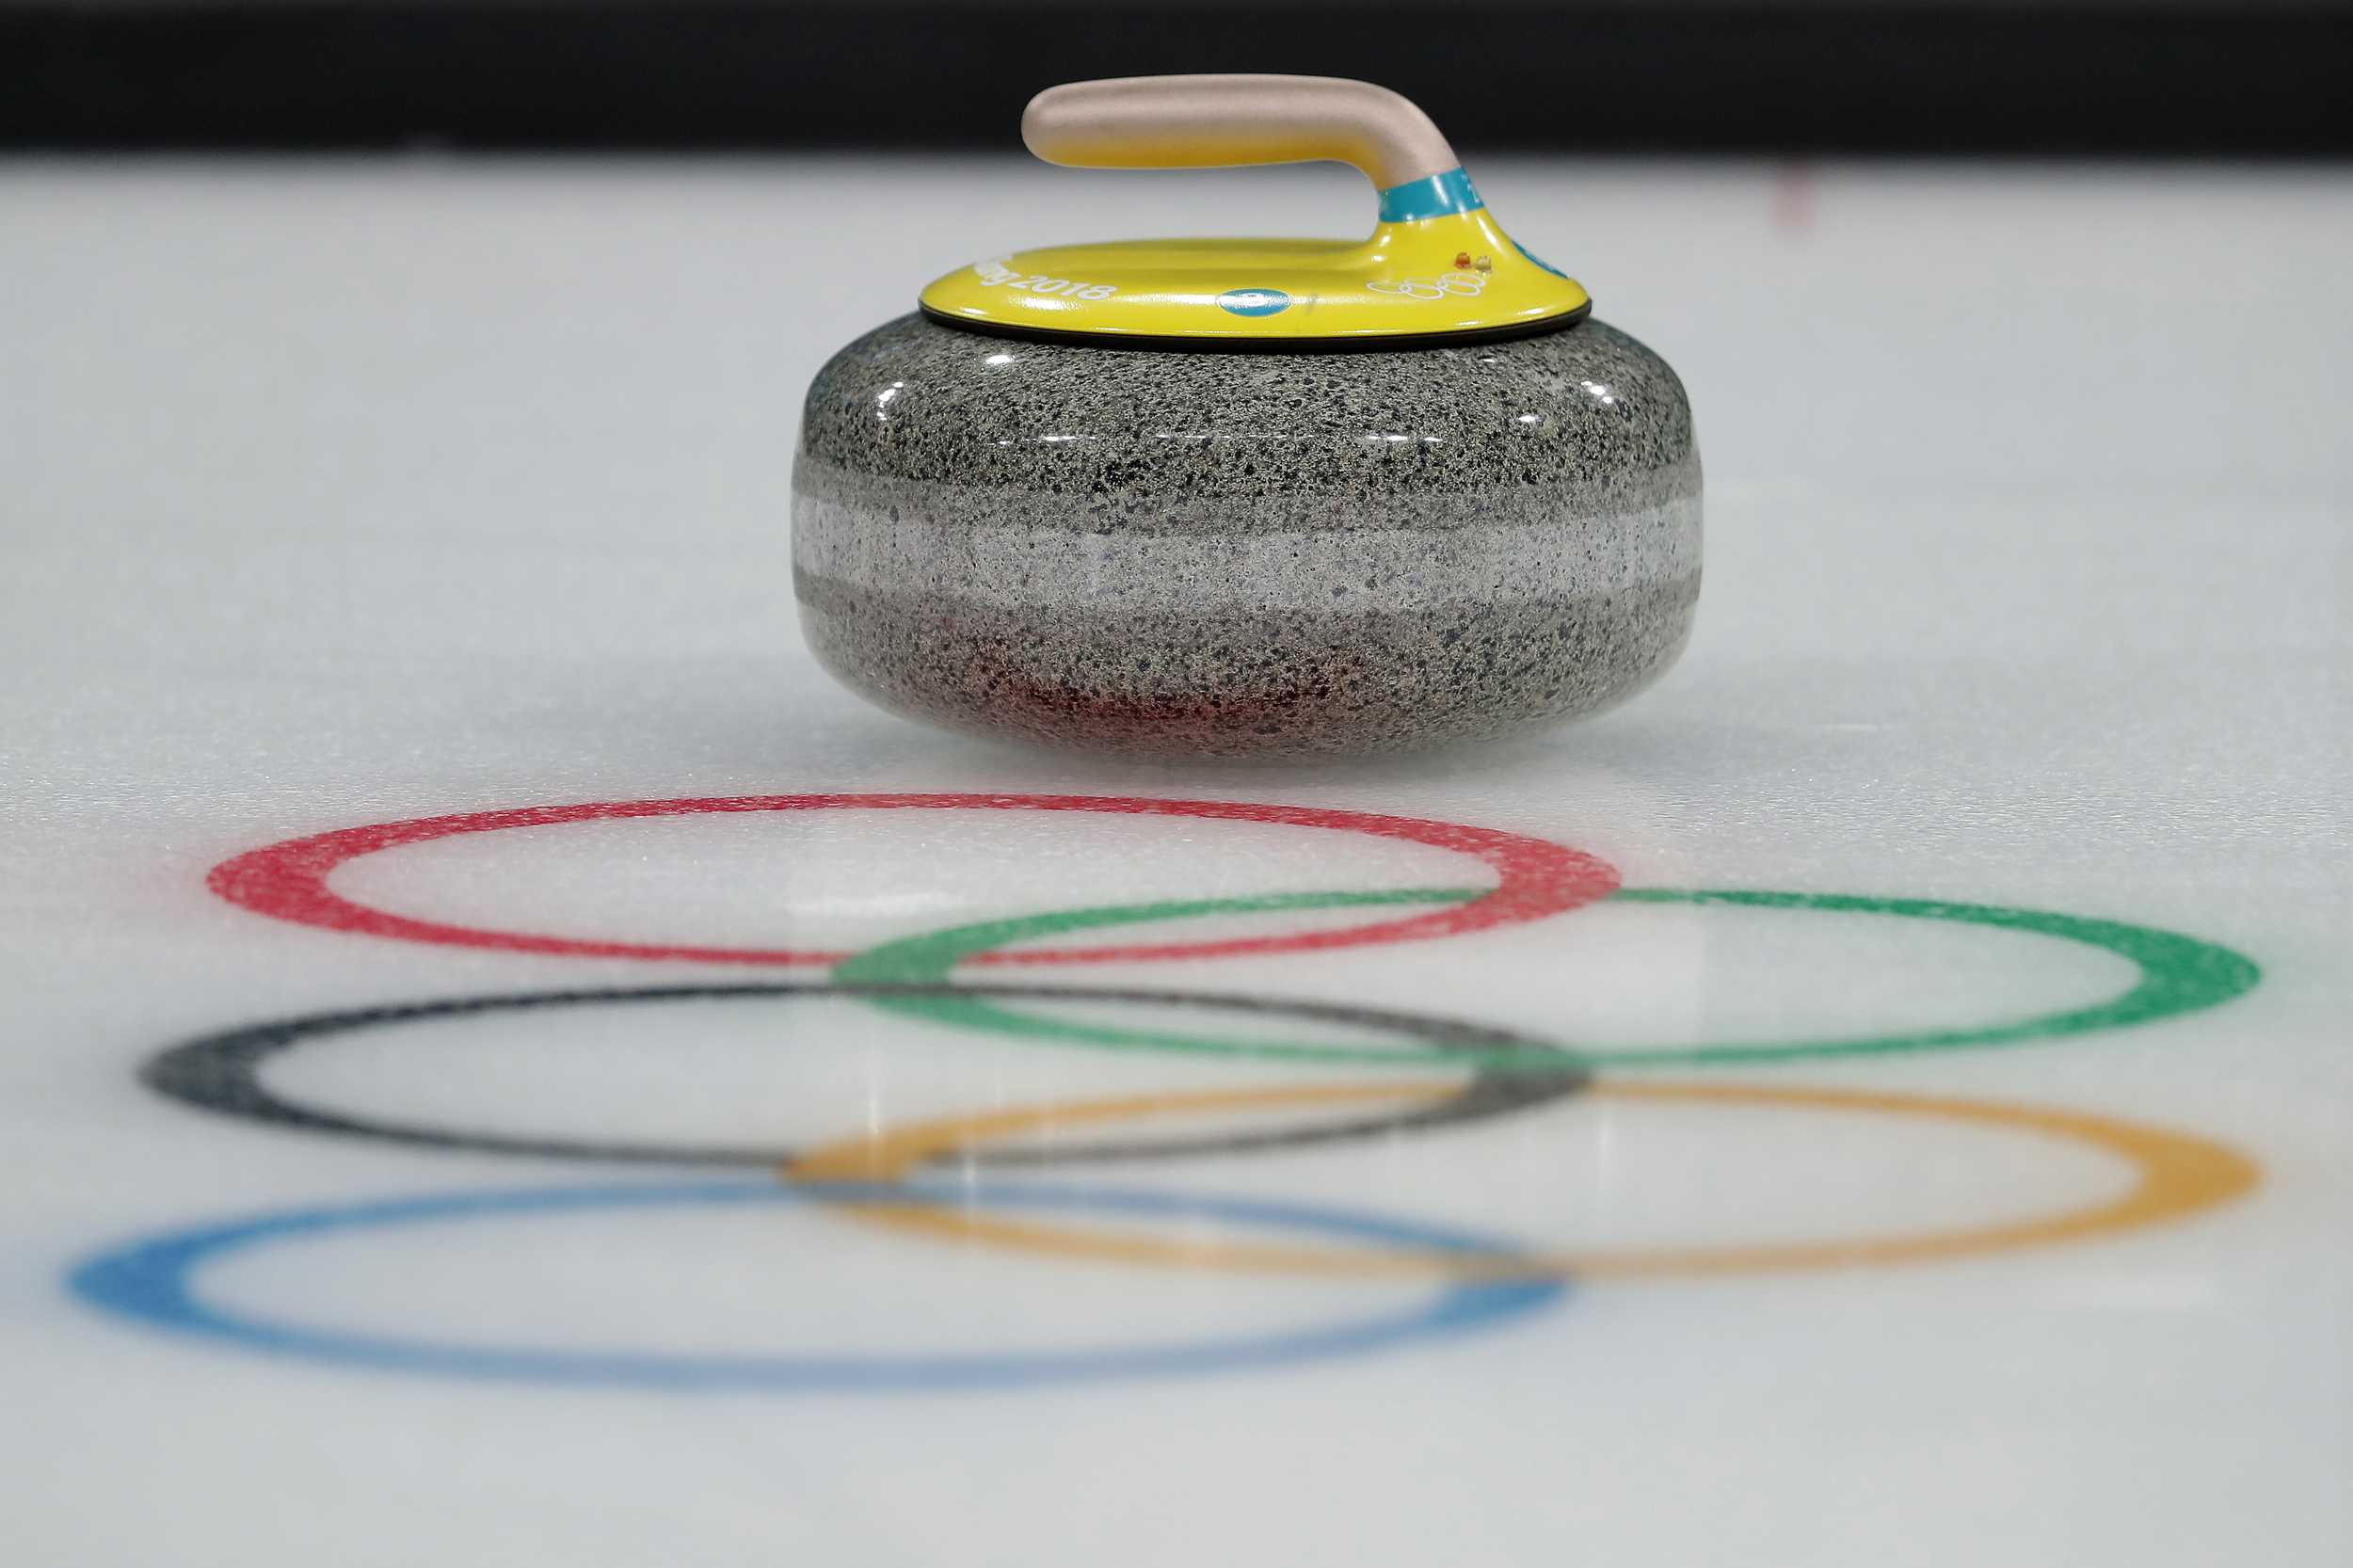 How does curling scoring work?